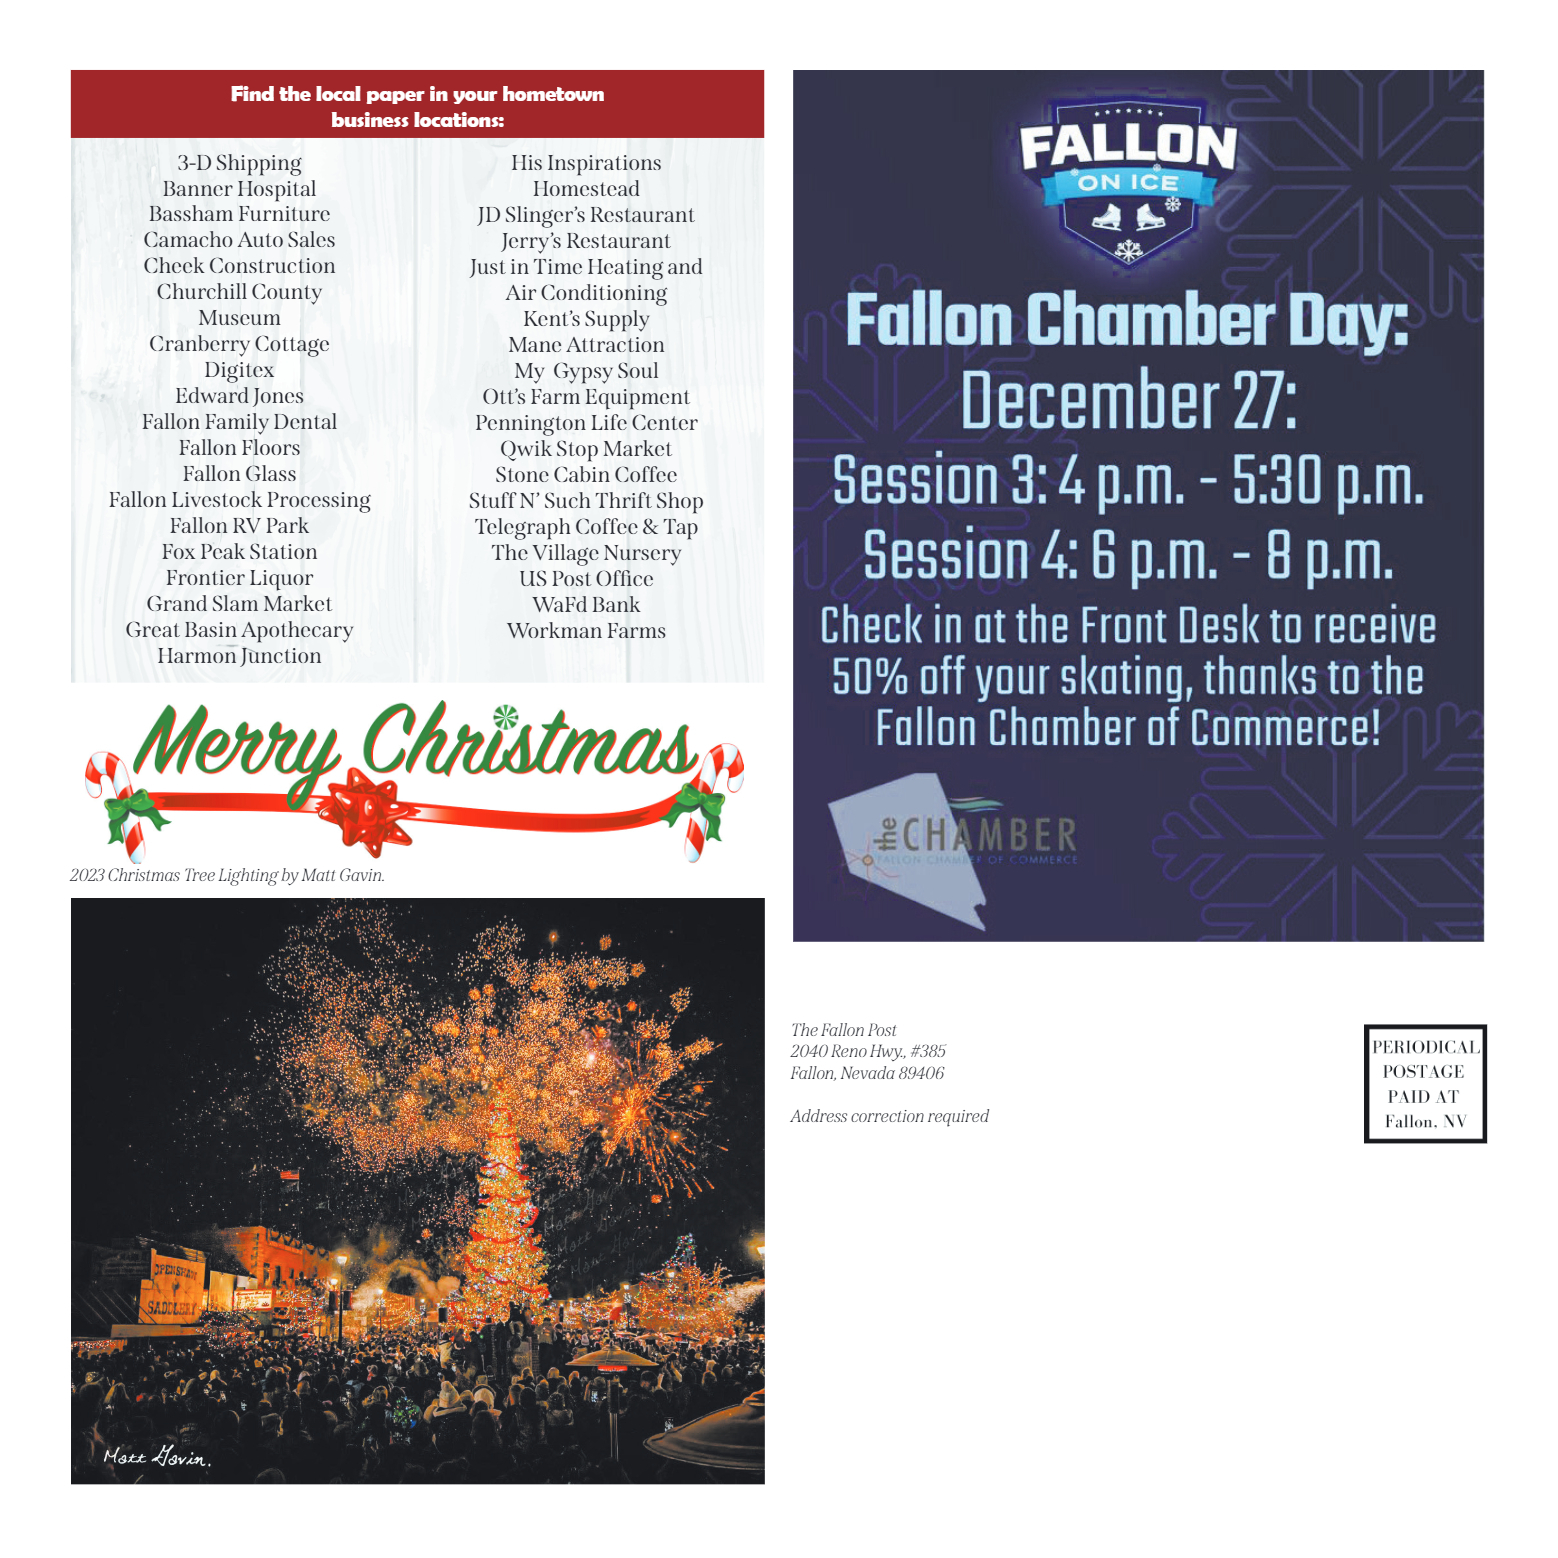 December 22 -- Warm Christmas Wishes from The Fall - page 24